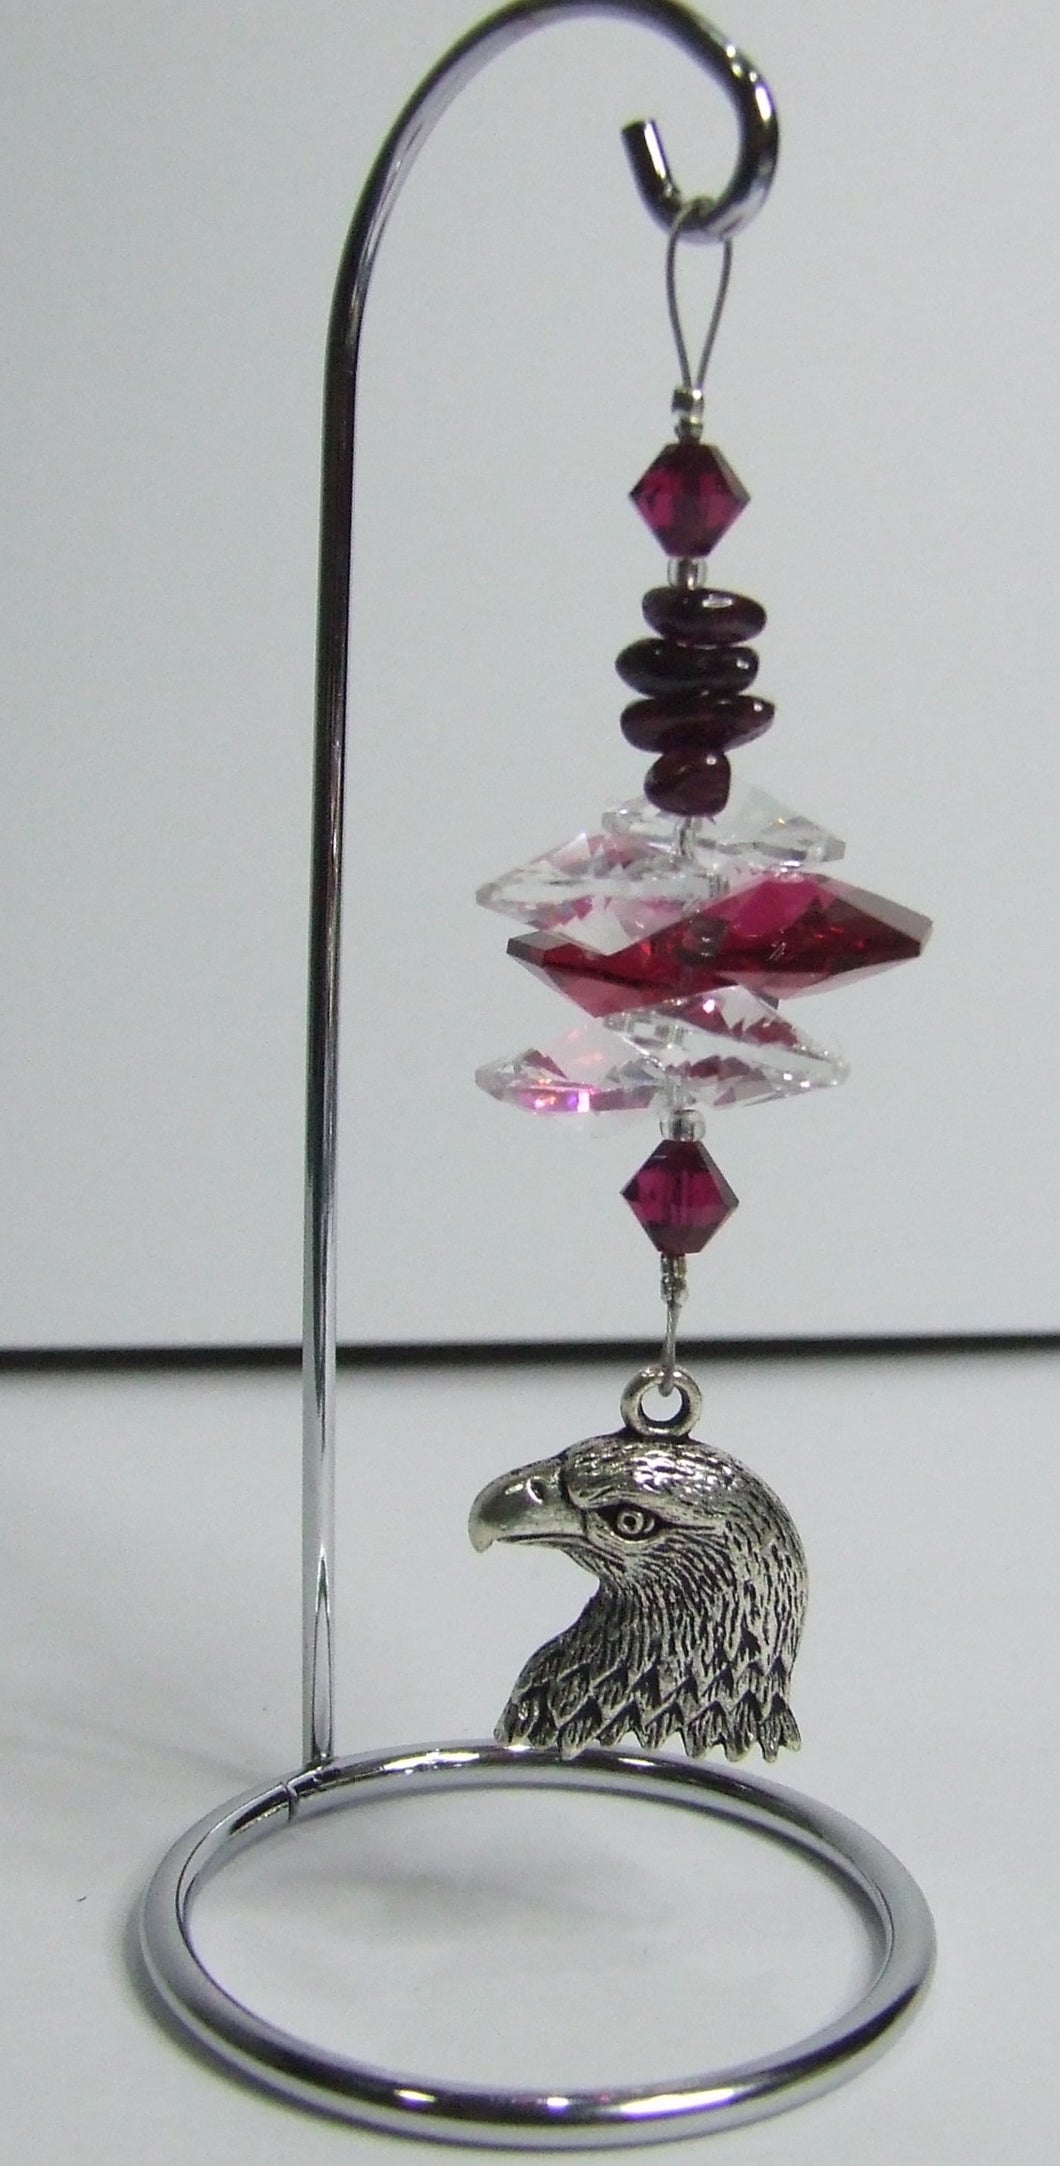 Eagle - red crystal suncatcher is decorated with garnet gemstones and come on this amazing small stand.